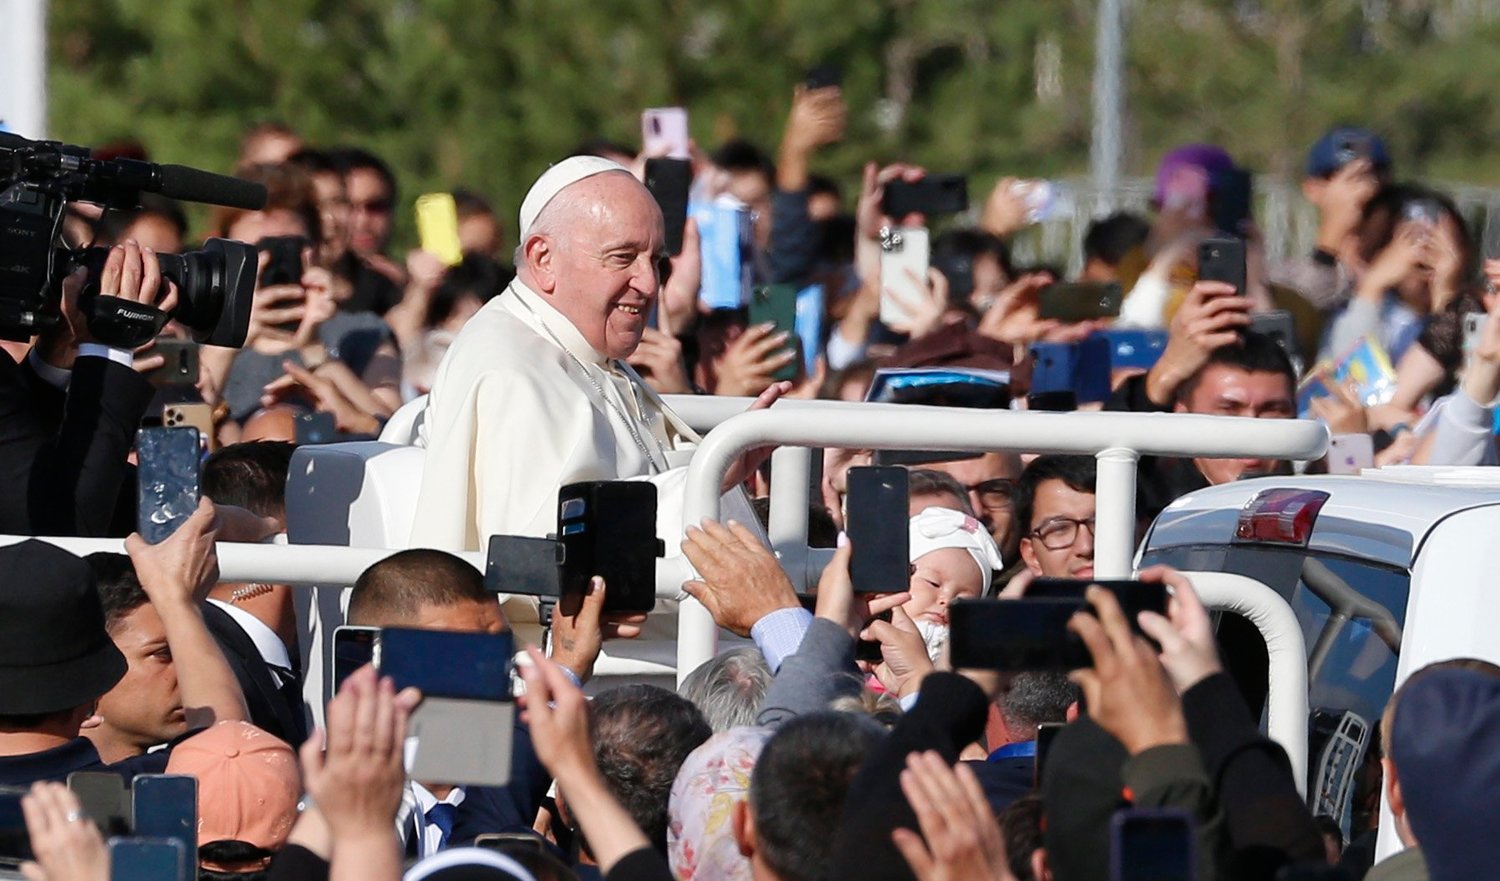 Pope Francis greets the crowd before celebrating Mass at the Expo grounds in Nur-Sultan, Kazakhstan, Sept. 14.